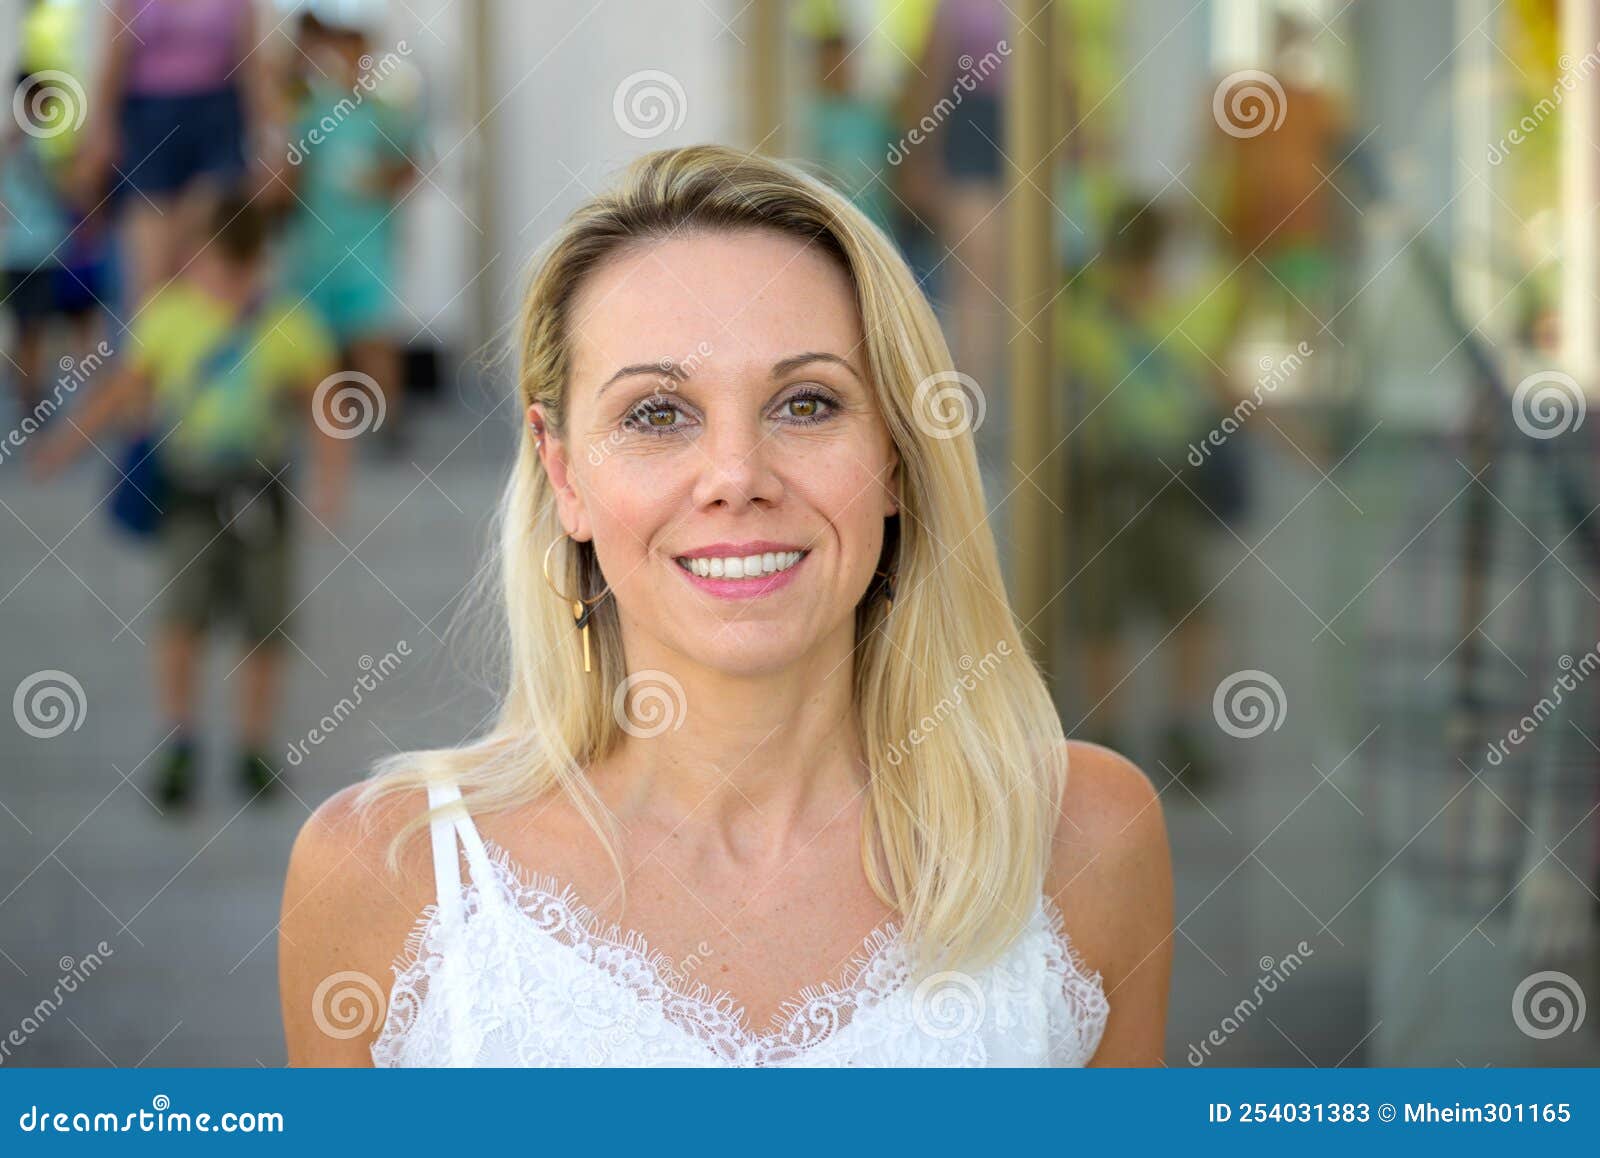 Cute Blond Woman With A Cheerful Happy Grin Stock Image Image Of Grin Woman 254031383